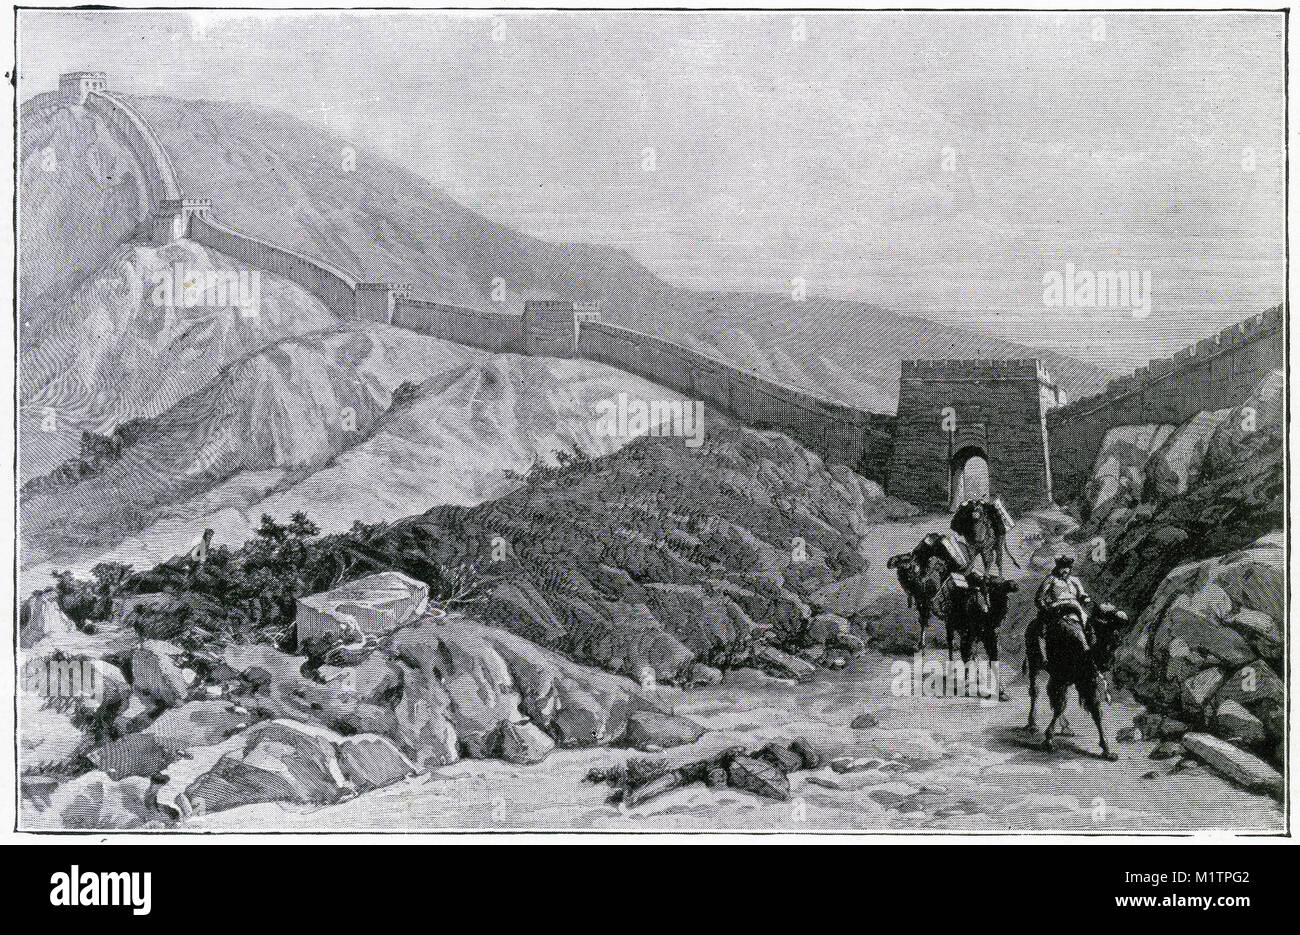 Halftone illustration of the Great Wall of China, circa 1900. From an original image in How Other People Live by H. Clive Barnard, 1918. Stock Photo